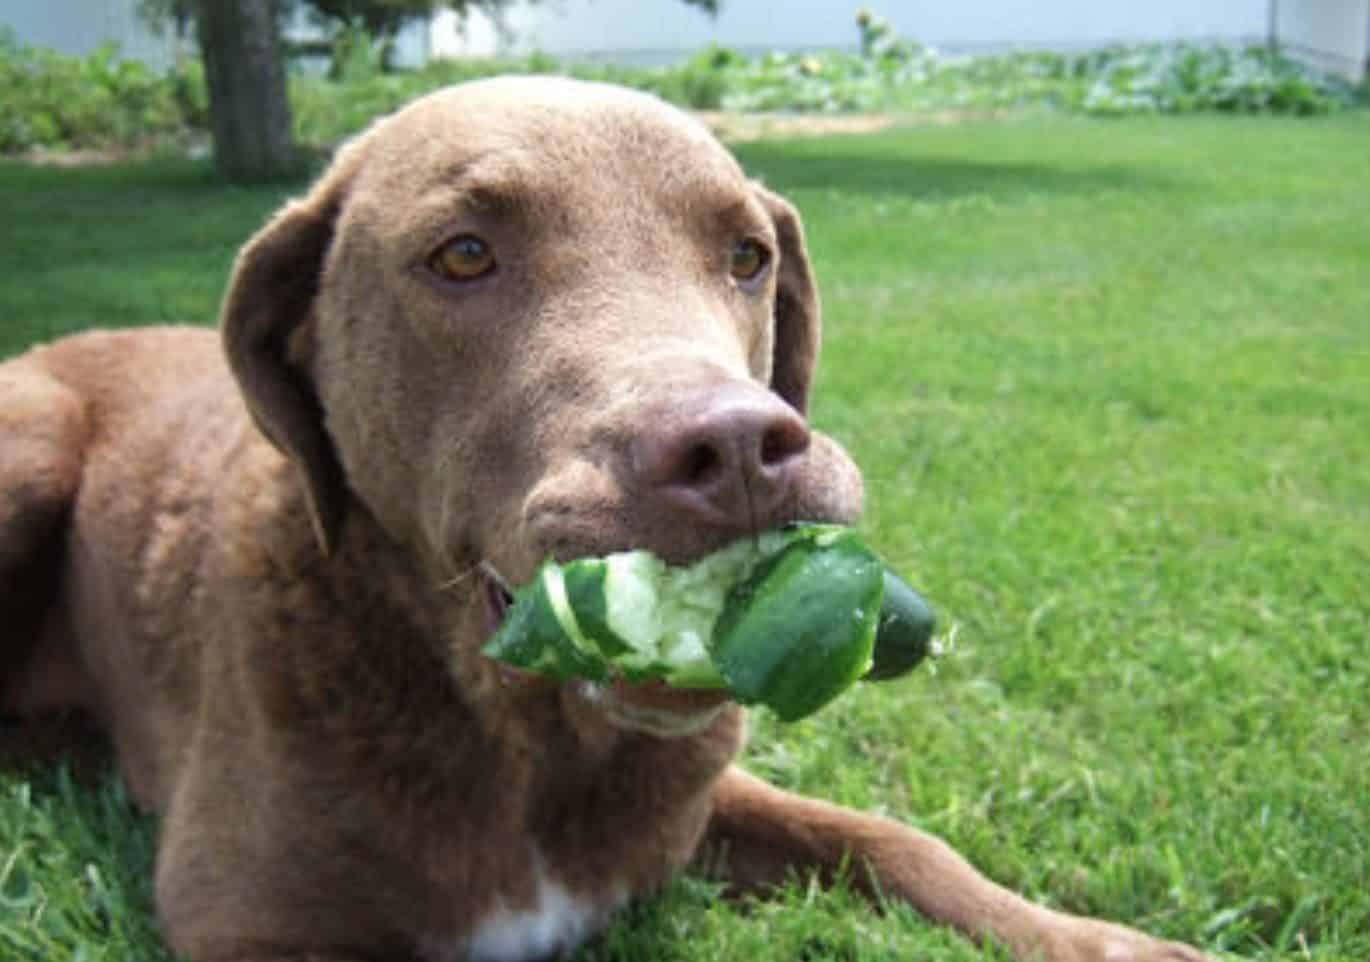 Dogs can only eat cucumbers when they are properly prepared for them.